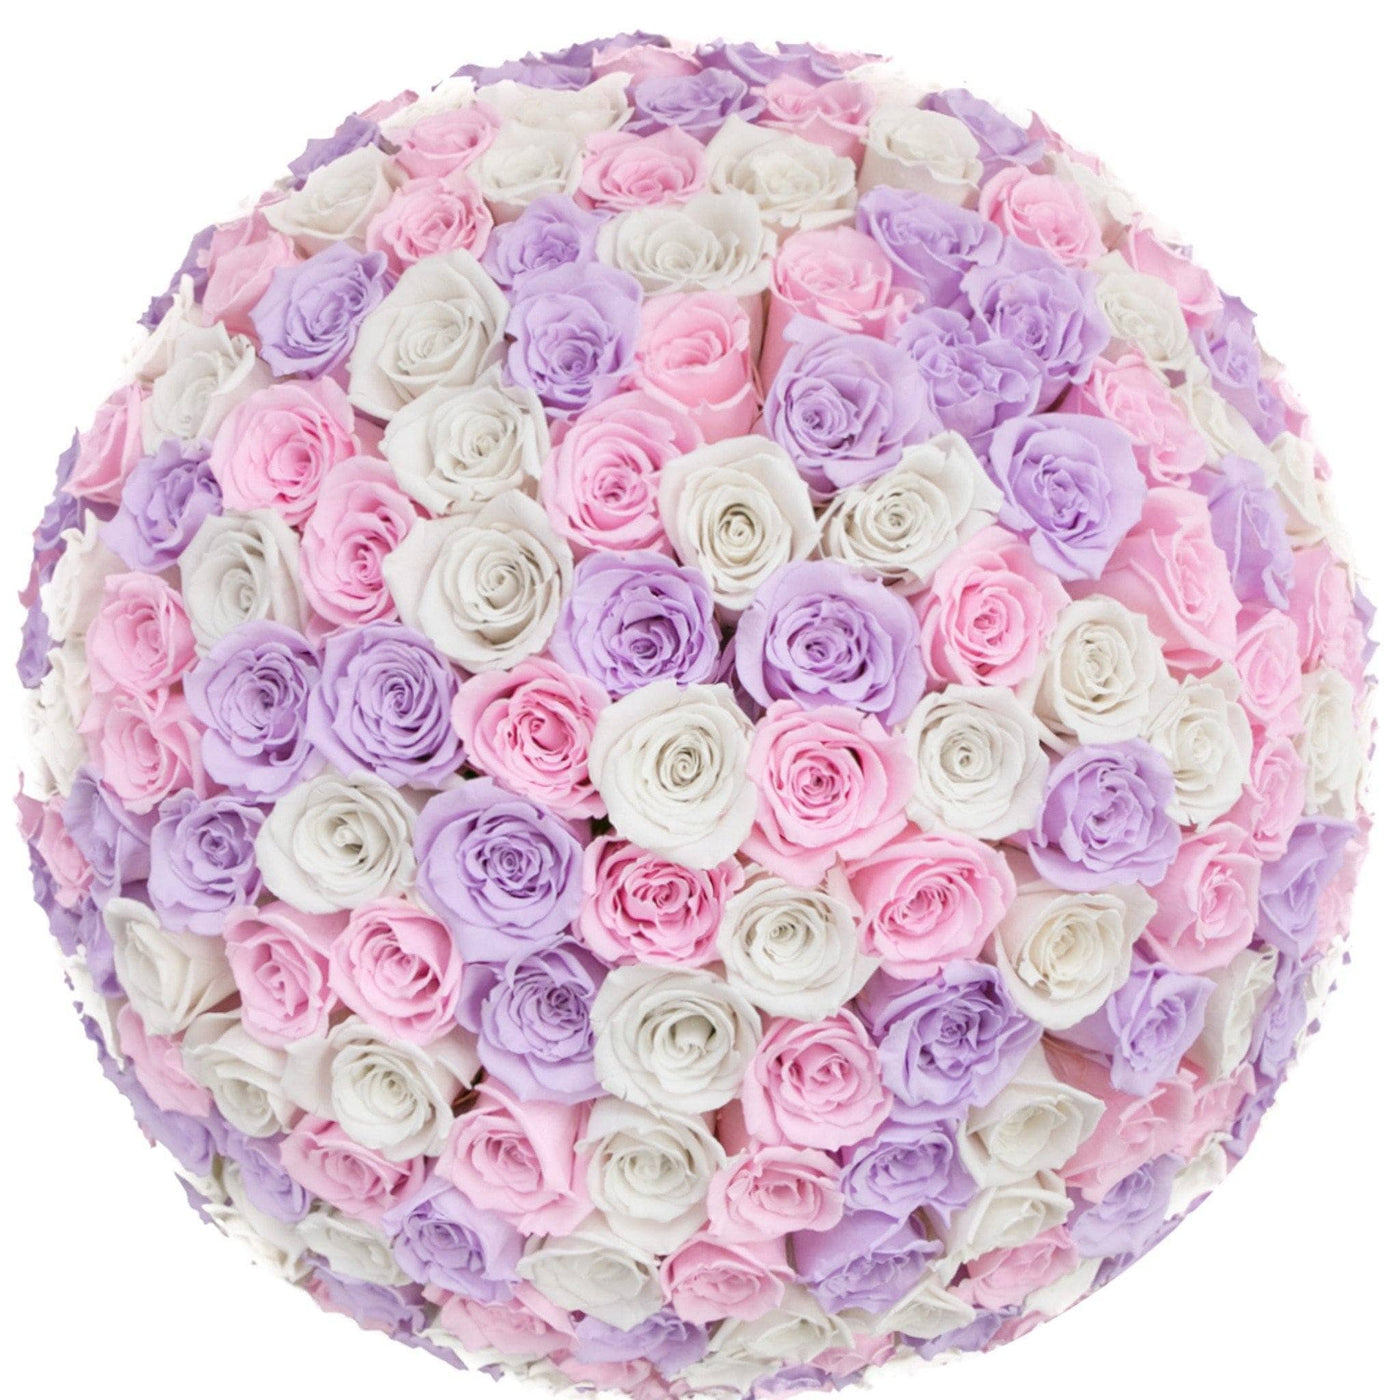 Princess Roses That Last A Year (Dome) - Deluxe Rose Box